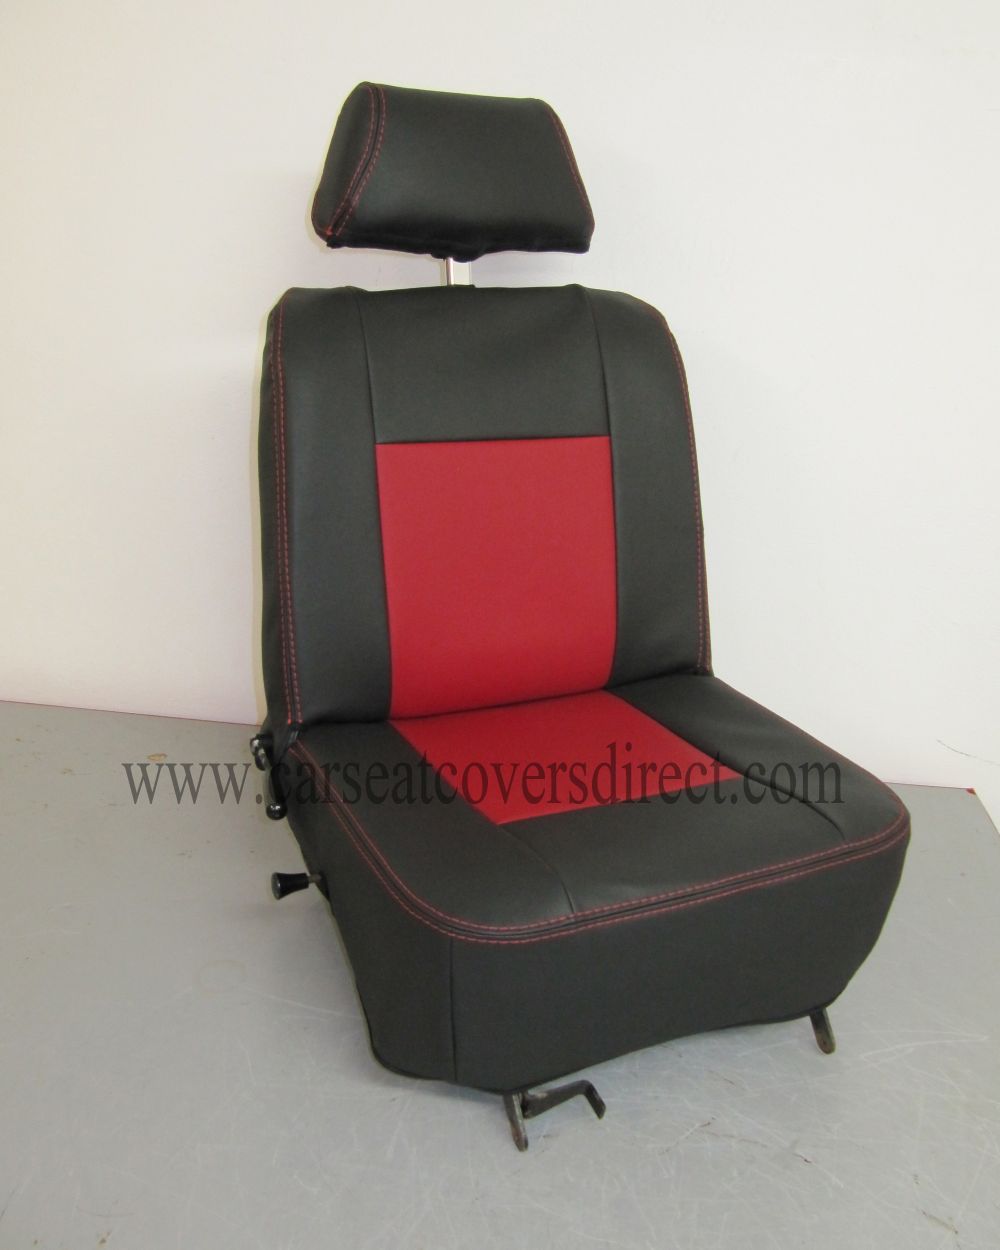 Peugeot 208 Tailored Car Seat Cover